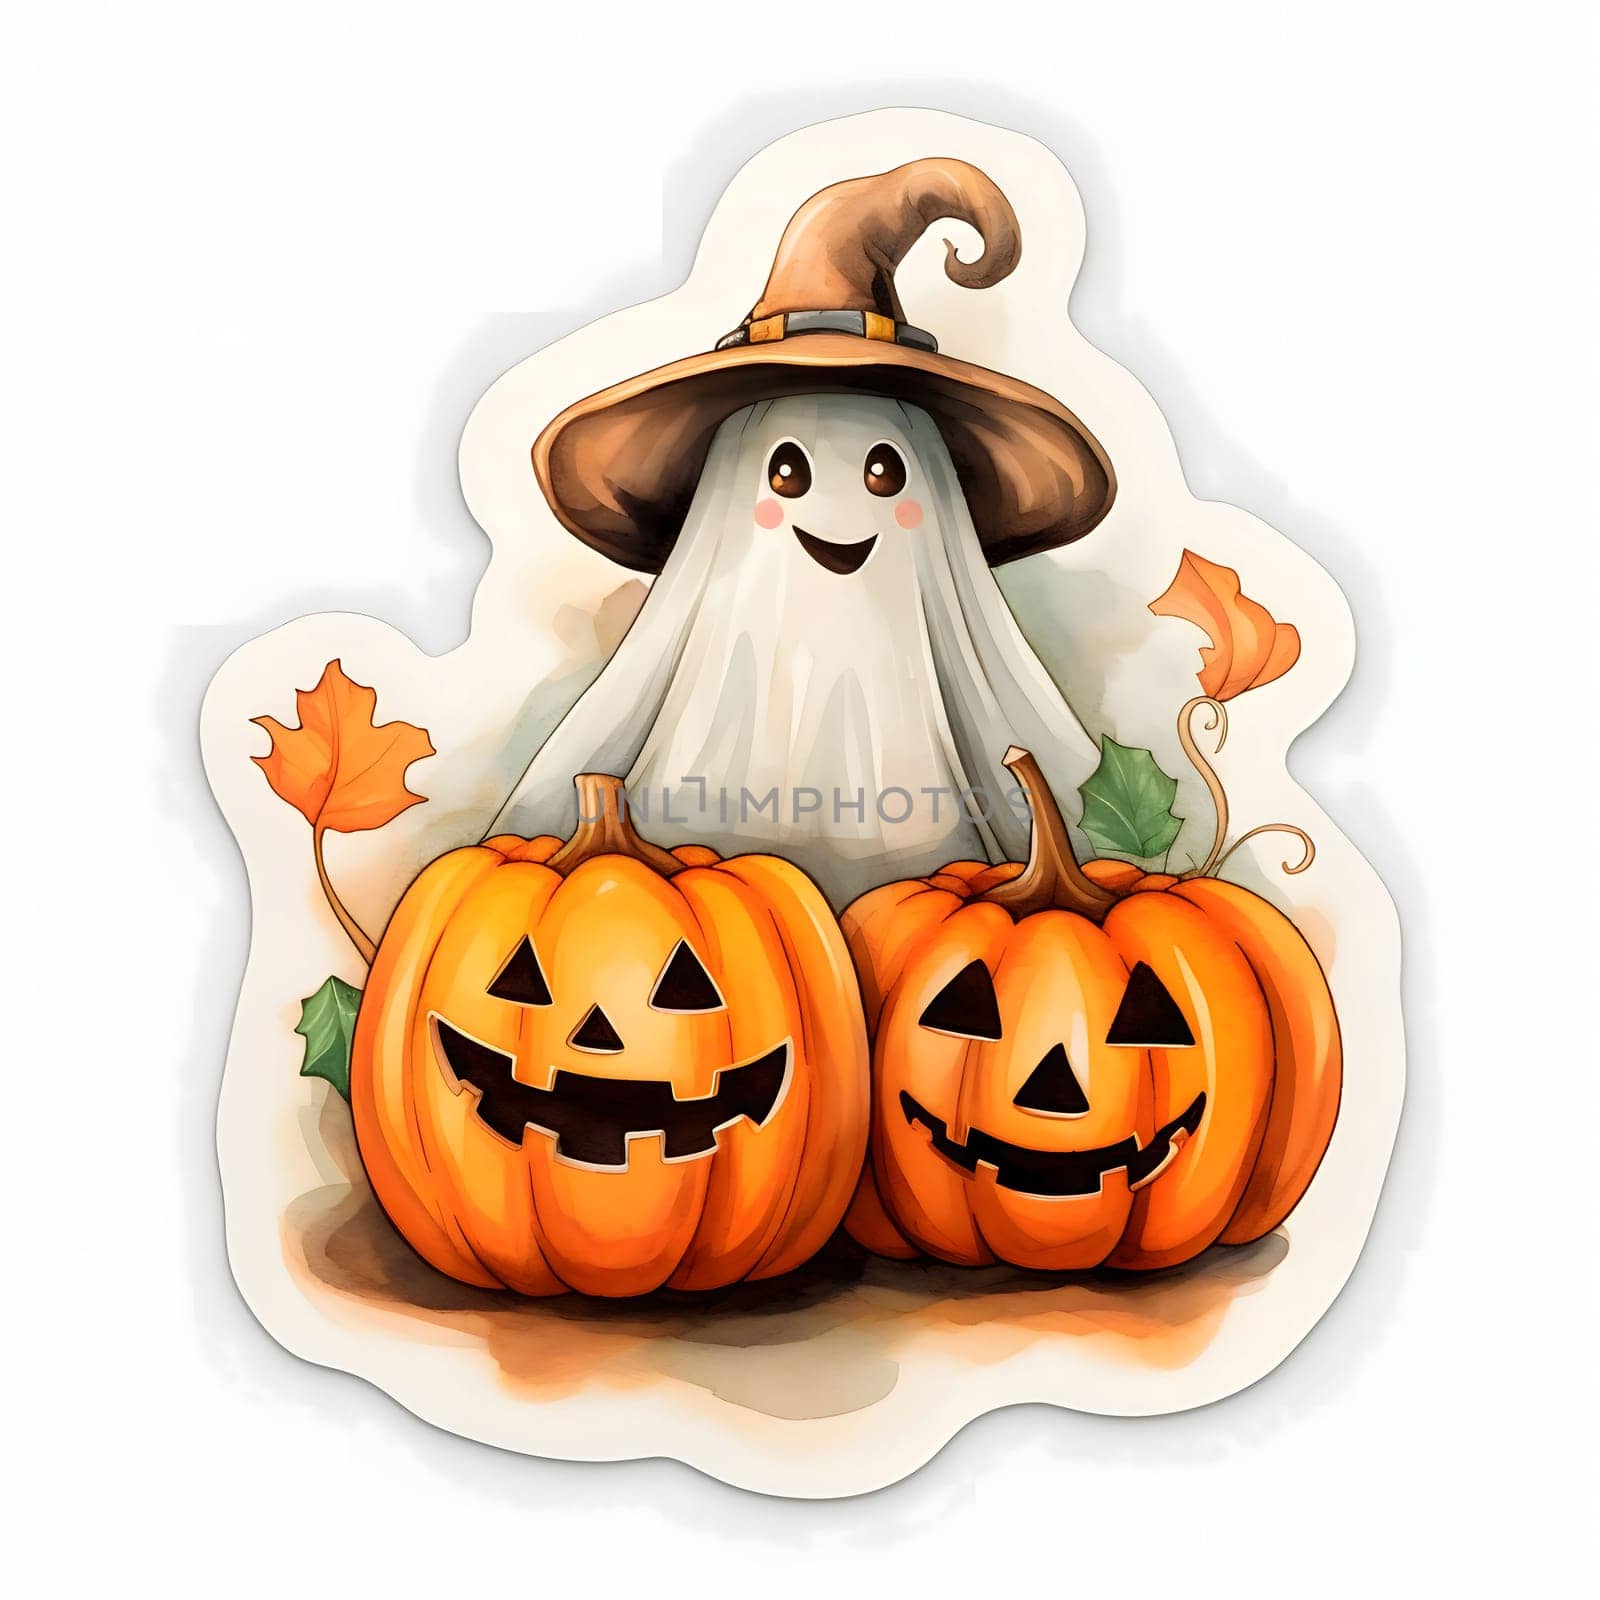 Sticker of jack-o-lantern pumpkin and a ghost in a hat, Halloween image on a white isolated background. by ThemesS